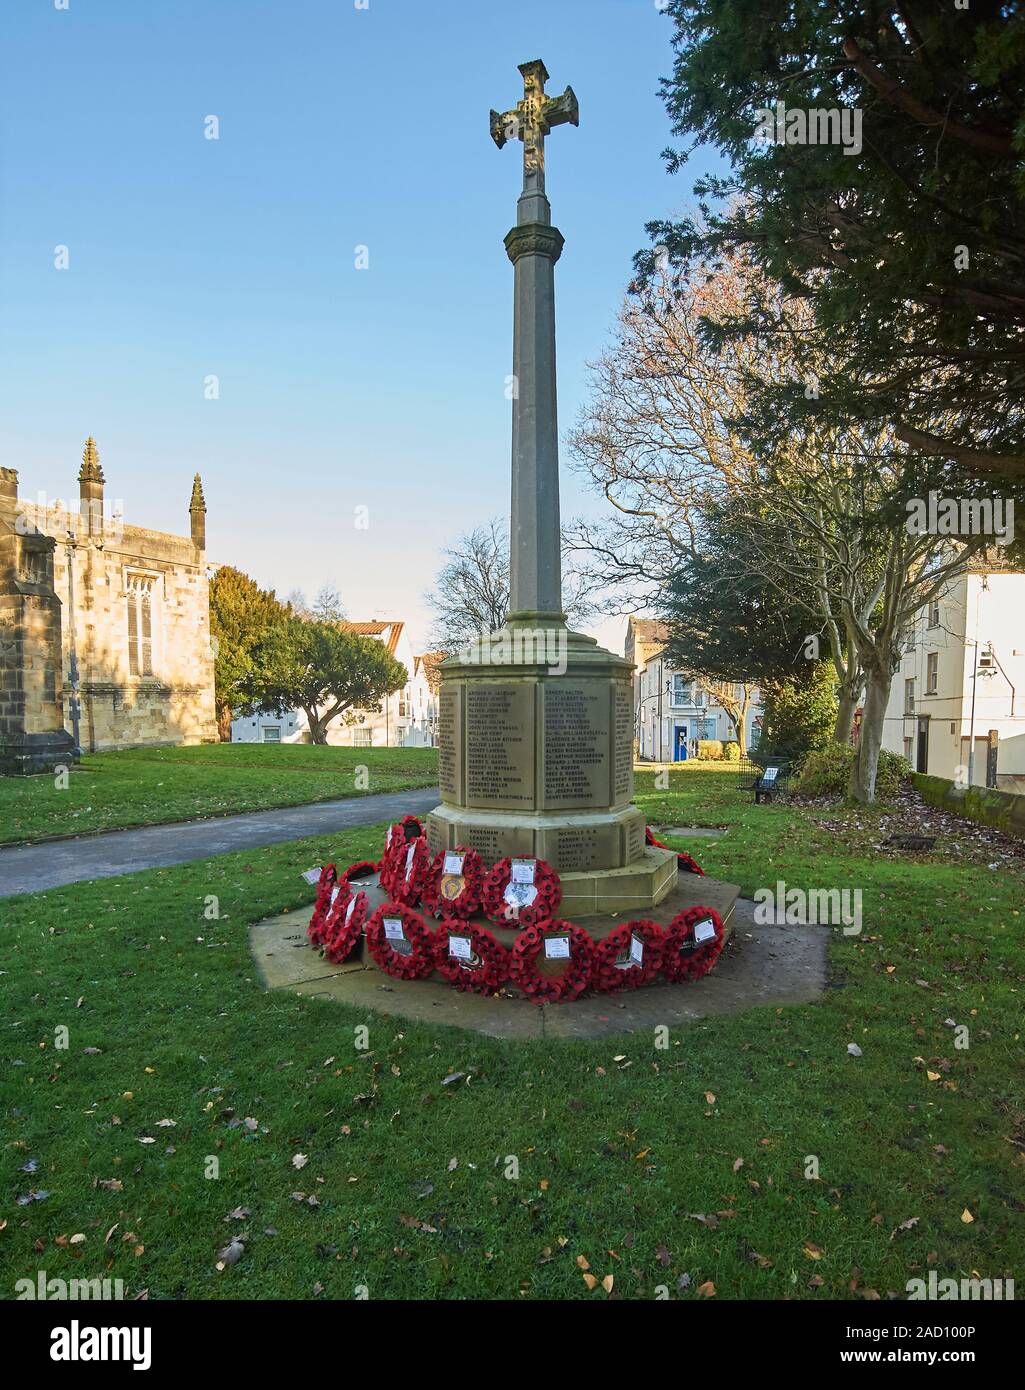 Wreaths of remembrance around the Cenotaph in the grounds of All Saints Church, Driffield, East Riding of Yorkshire, England, UK, GB. Stock Photo